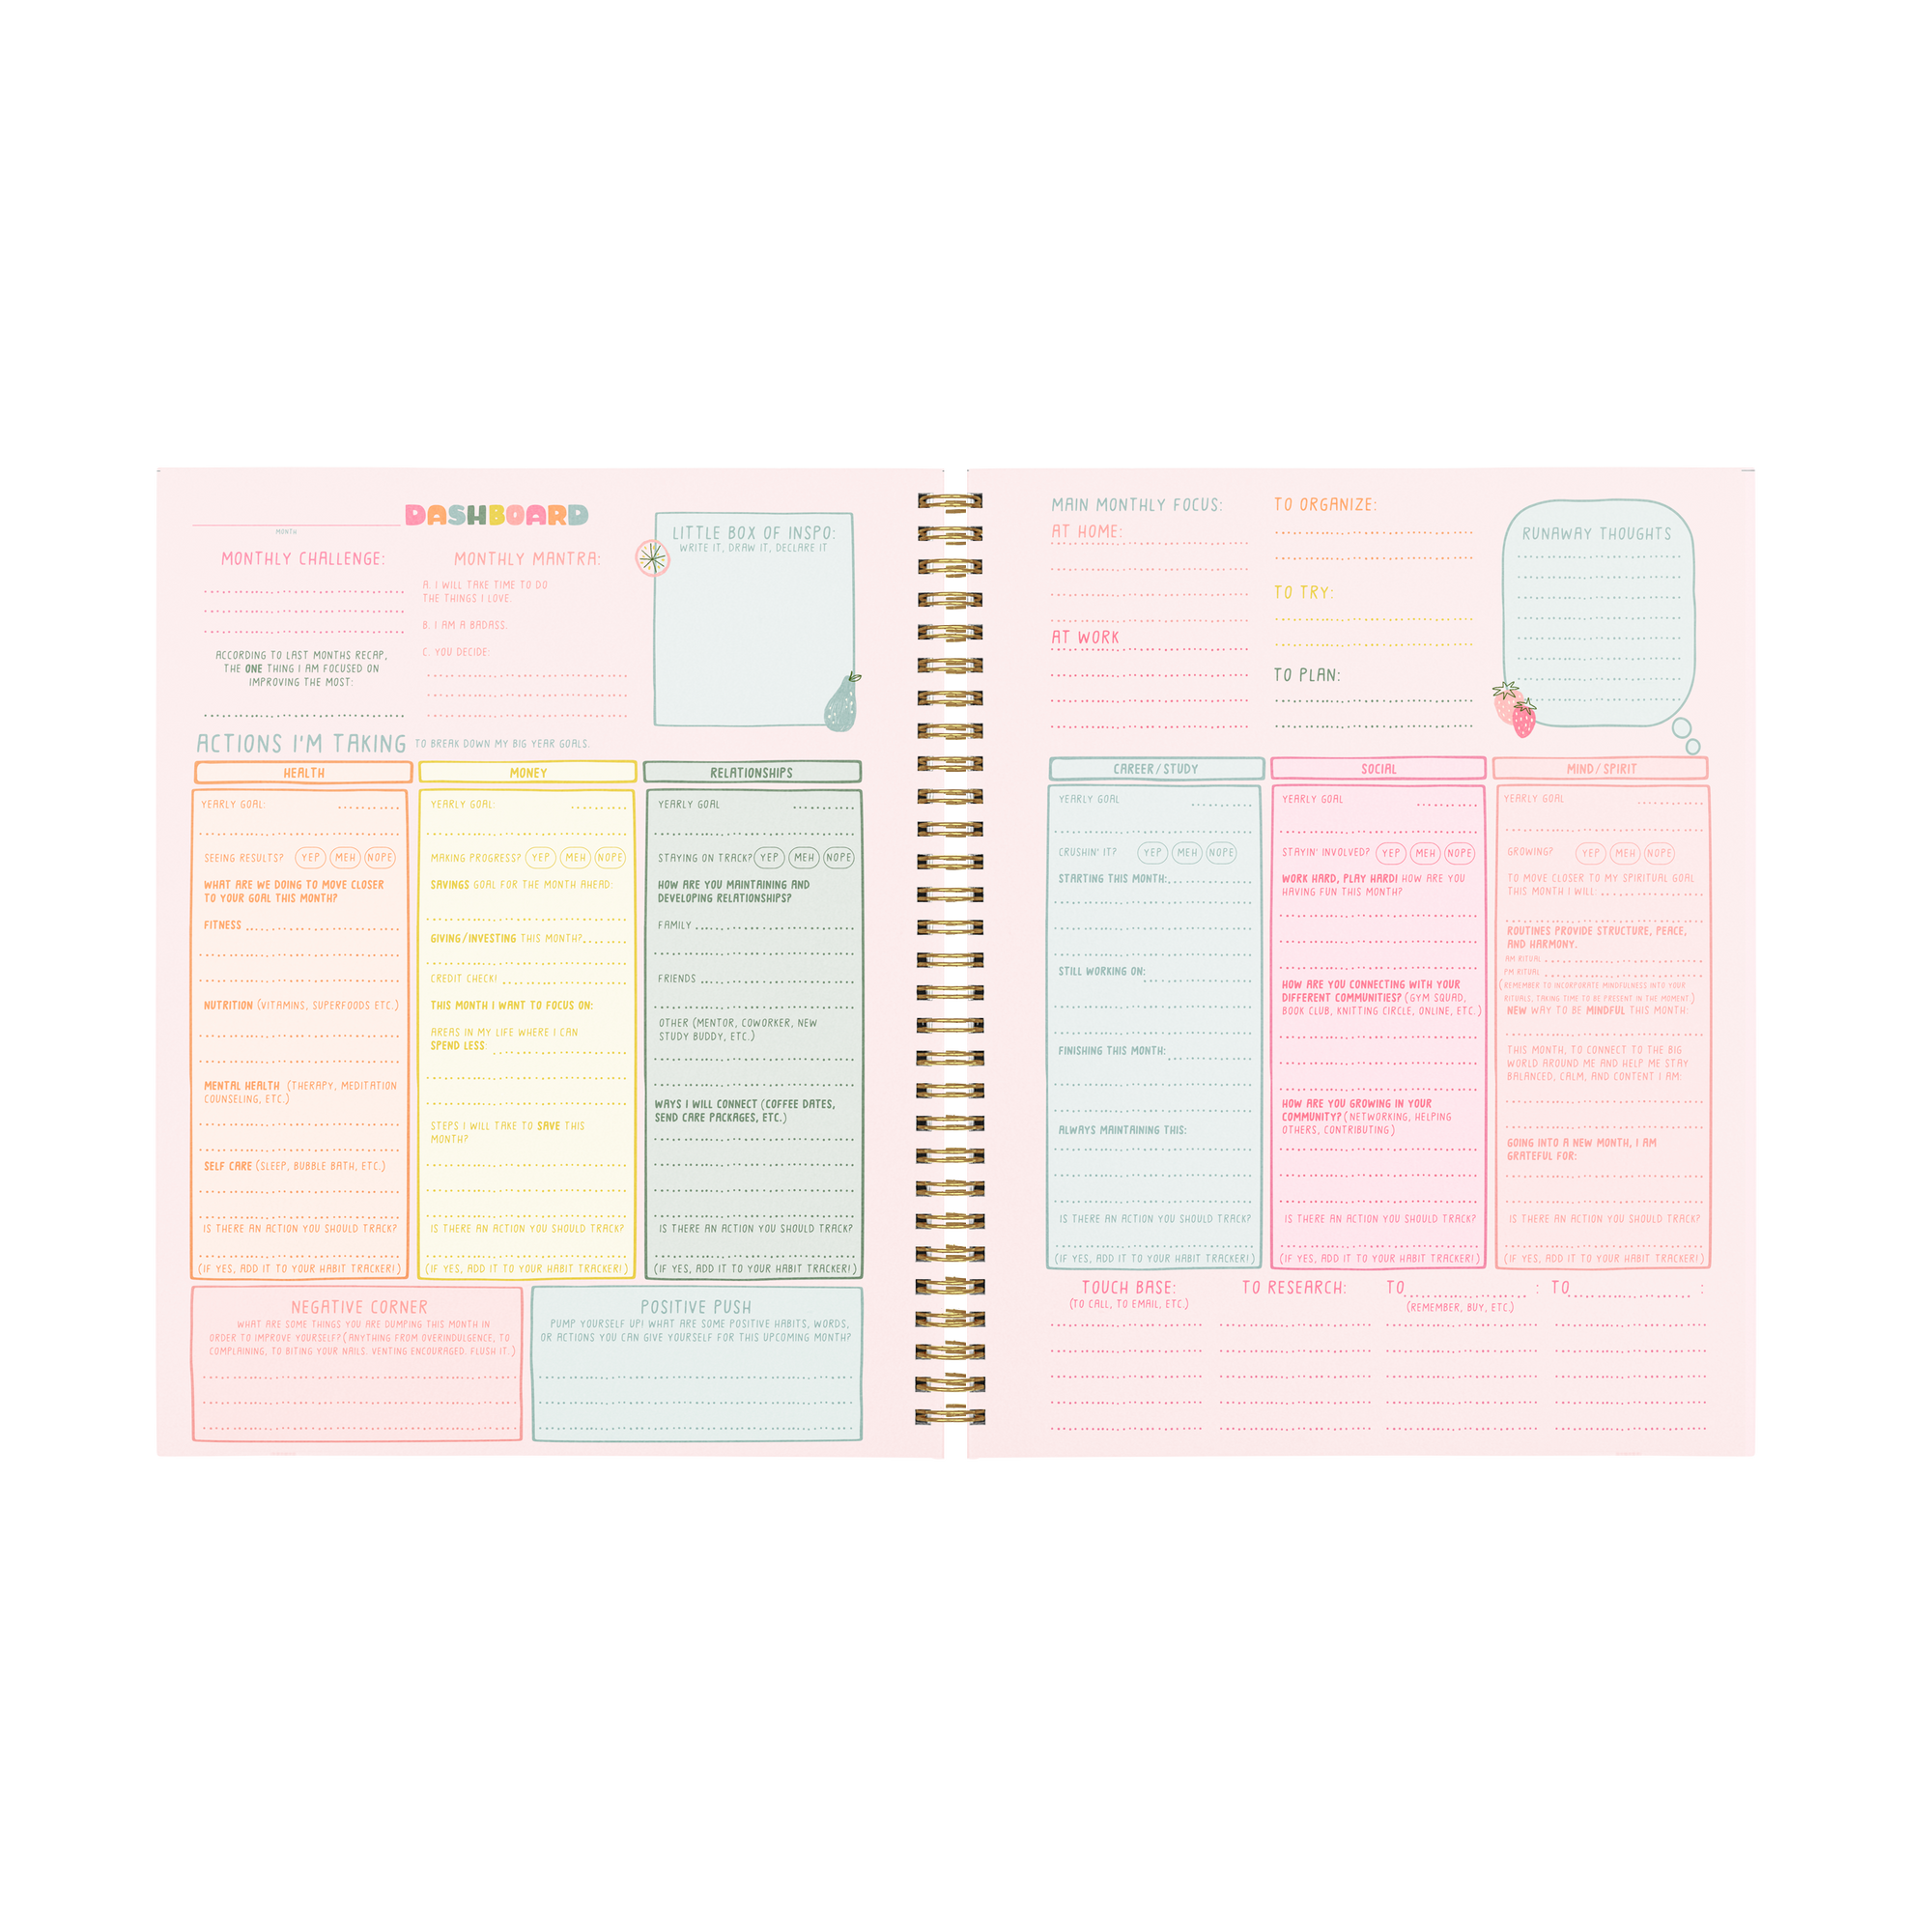 "Today's Gonna Be a Good Day" Goal Getter Perpetual Planner